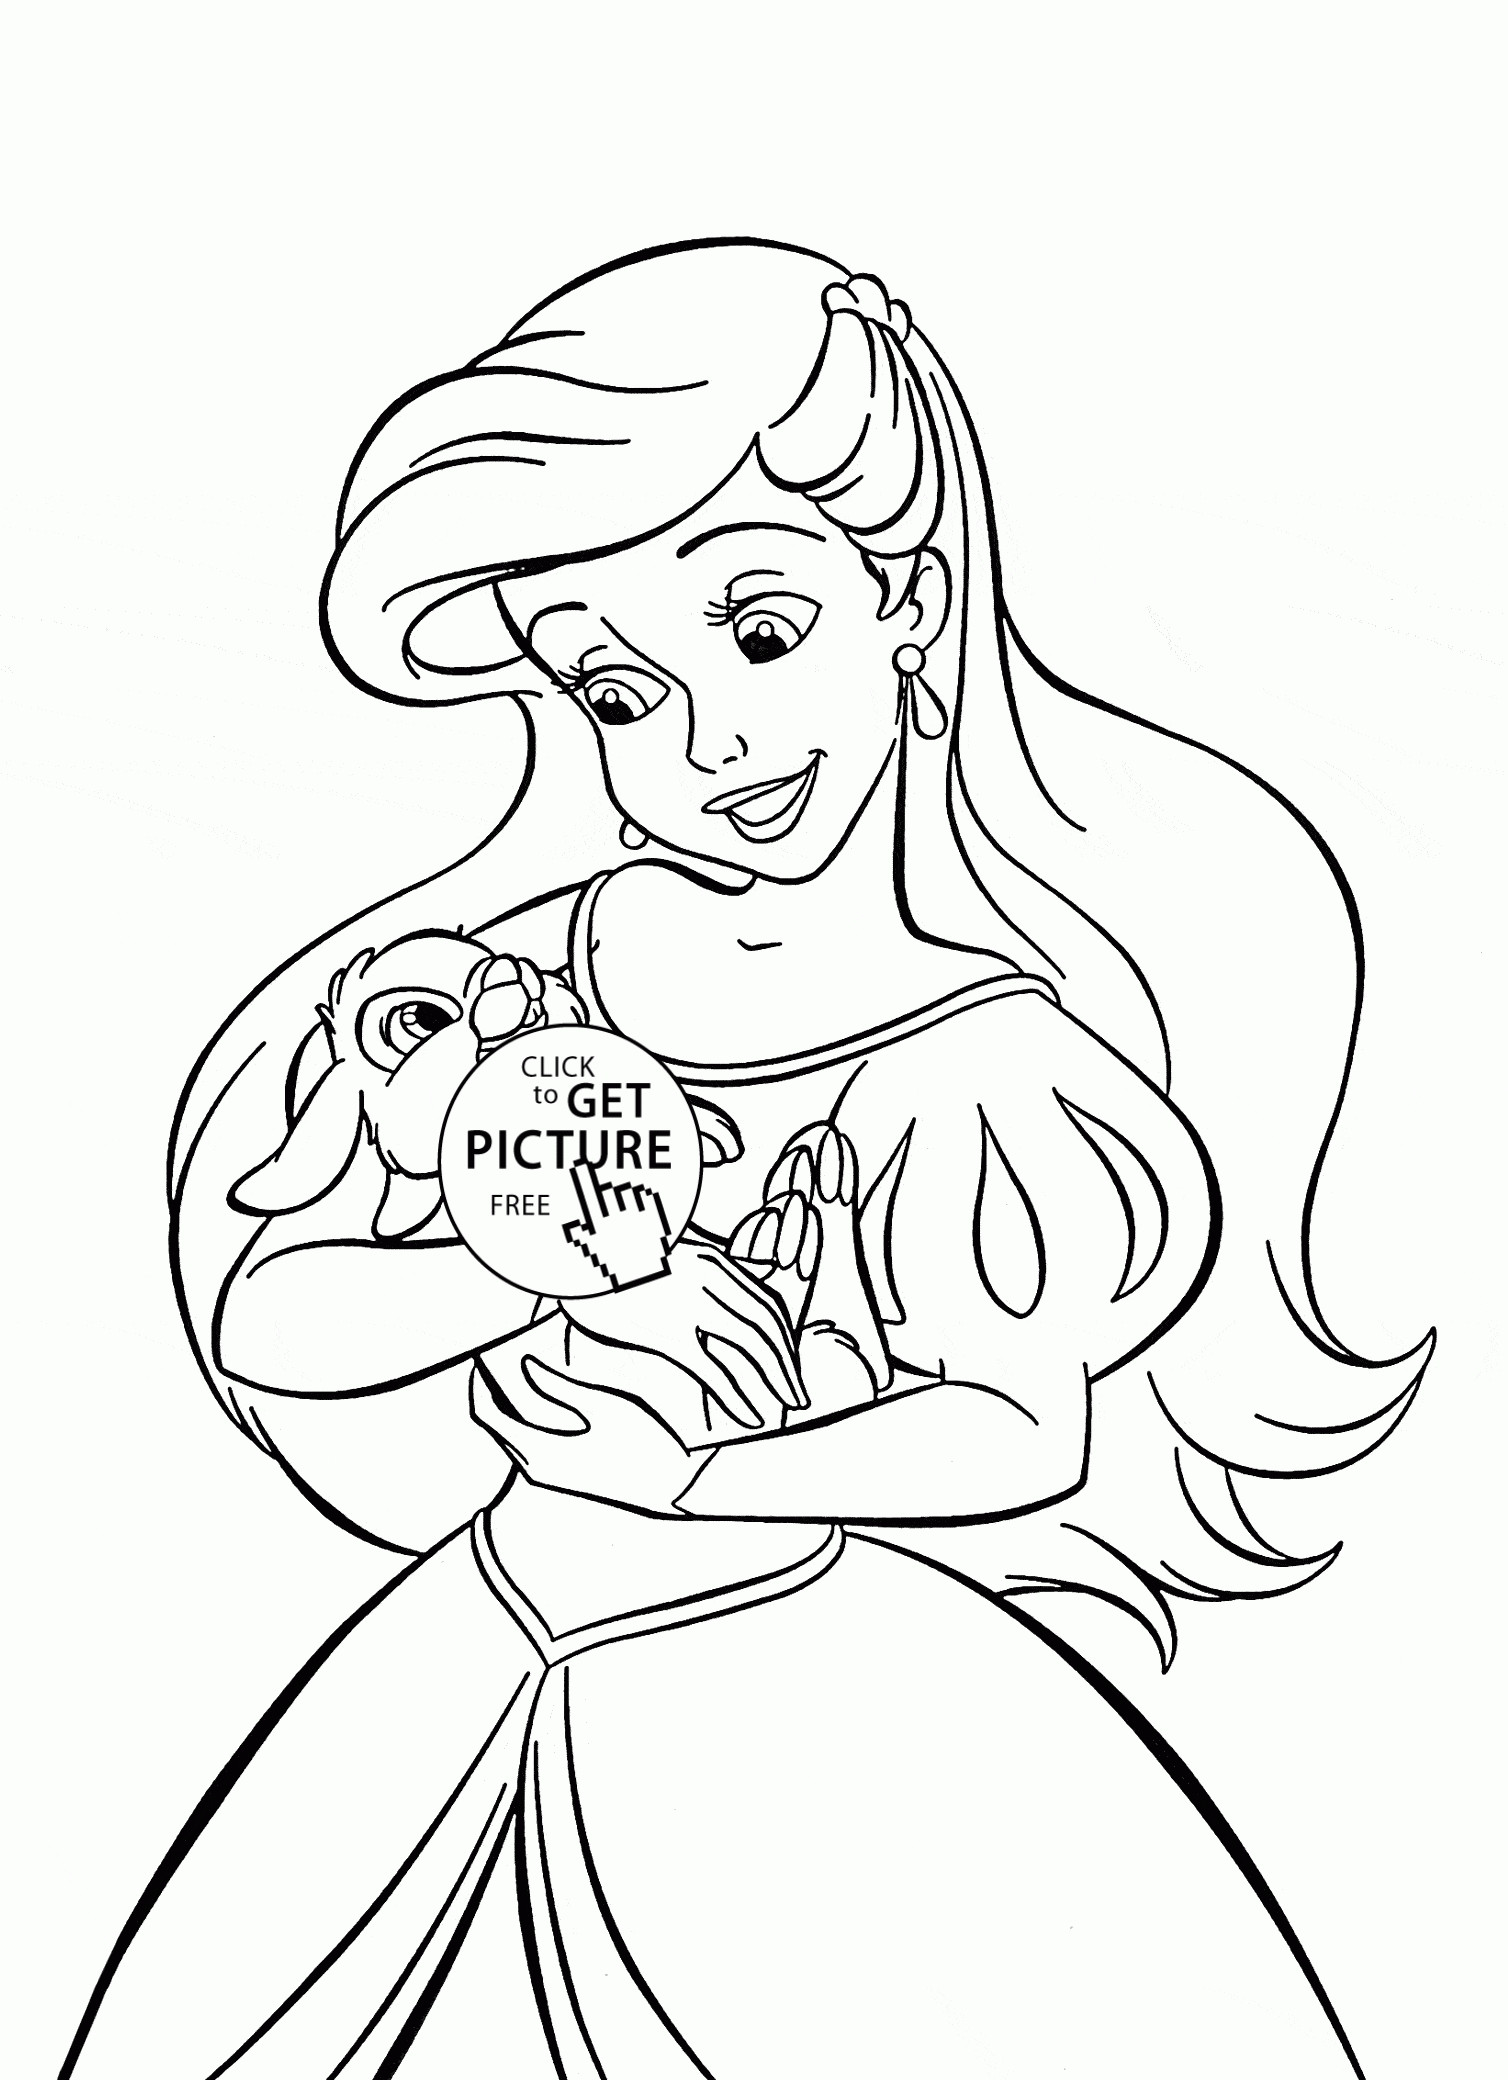 Coloring Pages Disney For Girls
 Disney Princess Ariel Coloring Pages For Girls